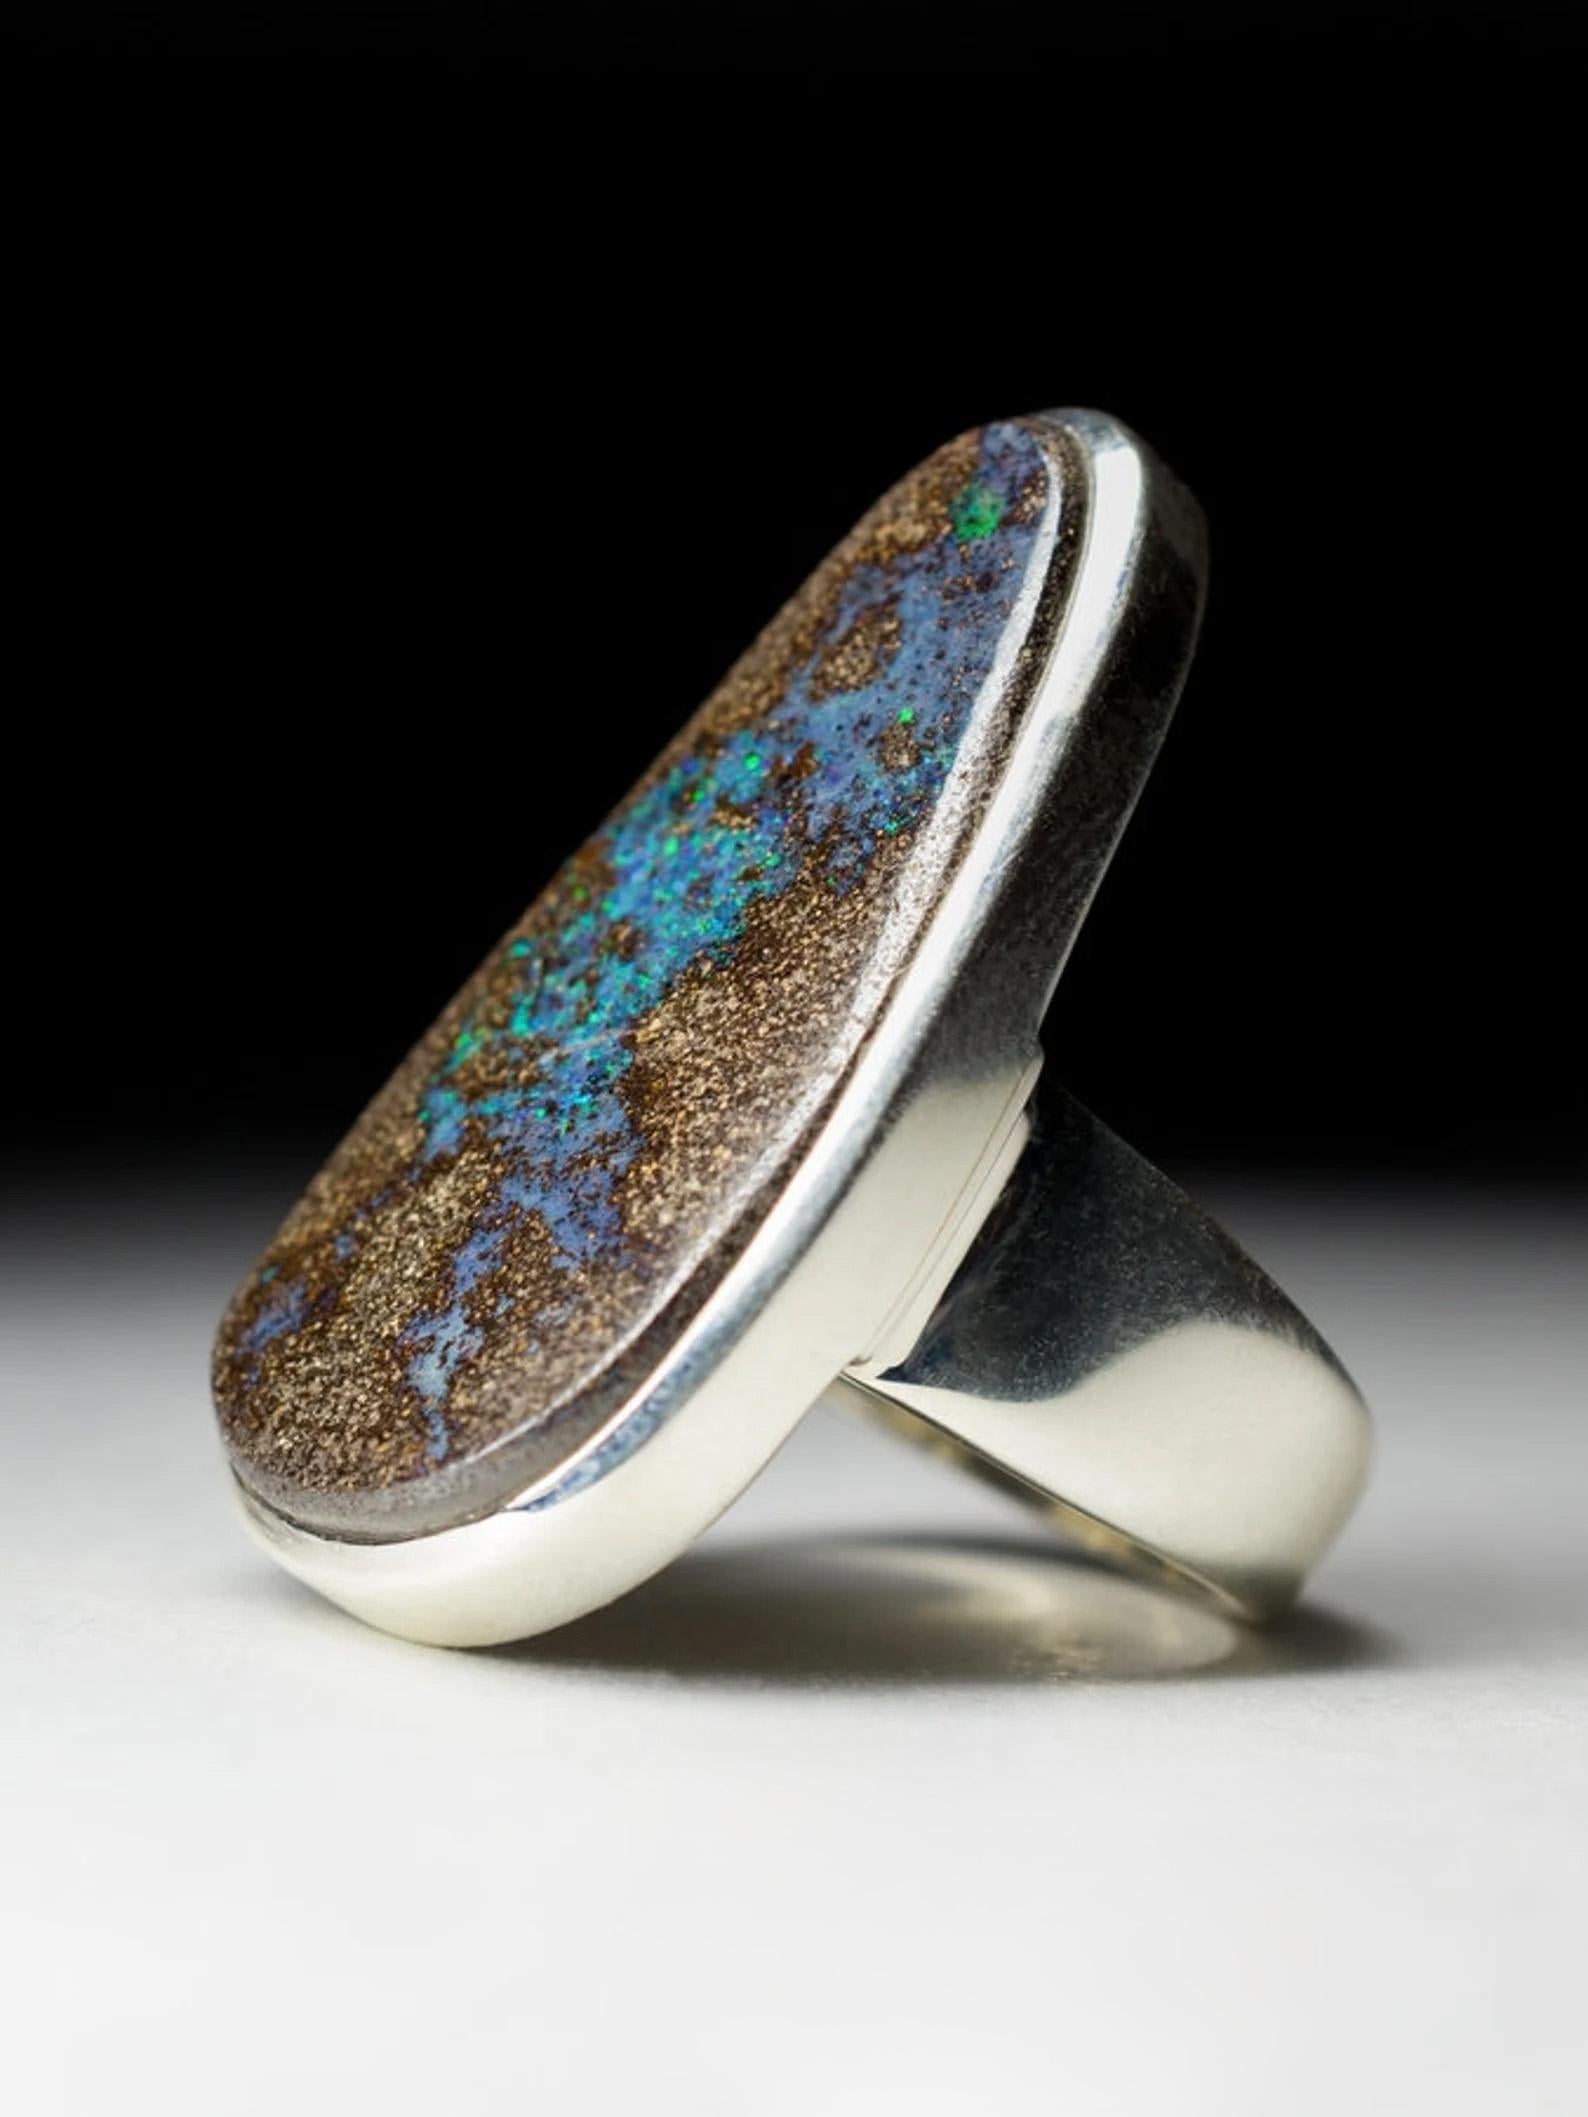 Big Boulder Opal Silver Ring Chunky Cabochon Turquoise Blue Brown Gemstone 1